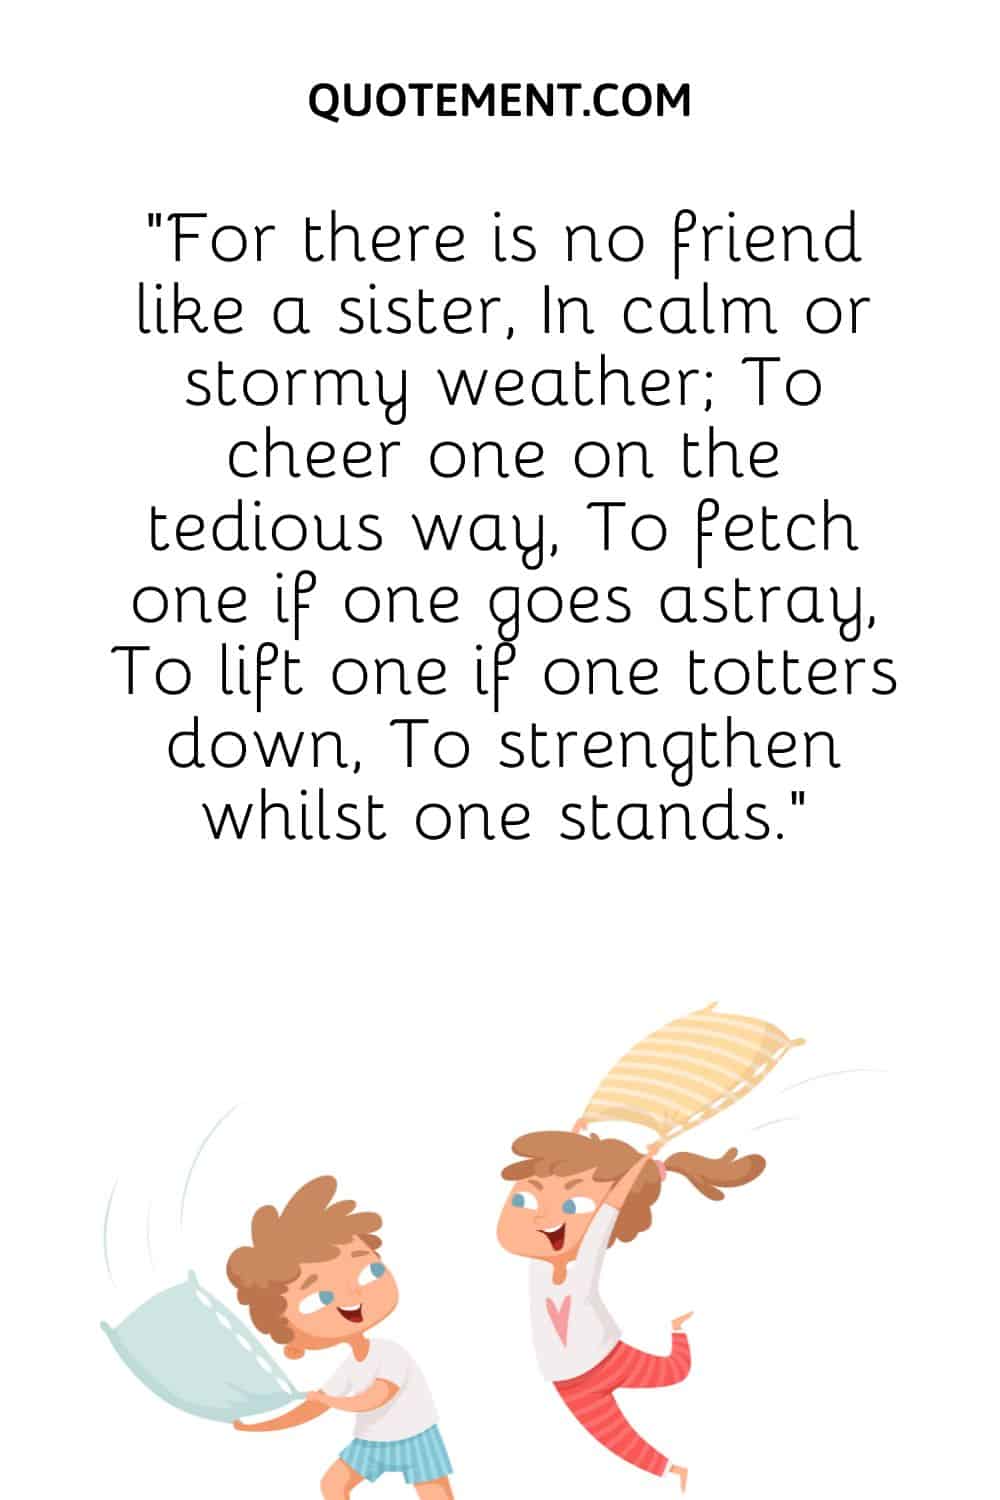 For there is no friend like a sister, In calm or stormy weather